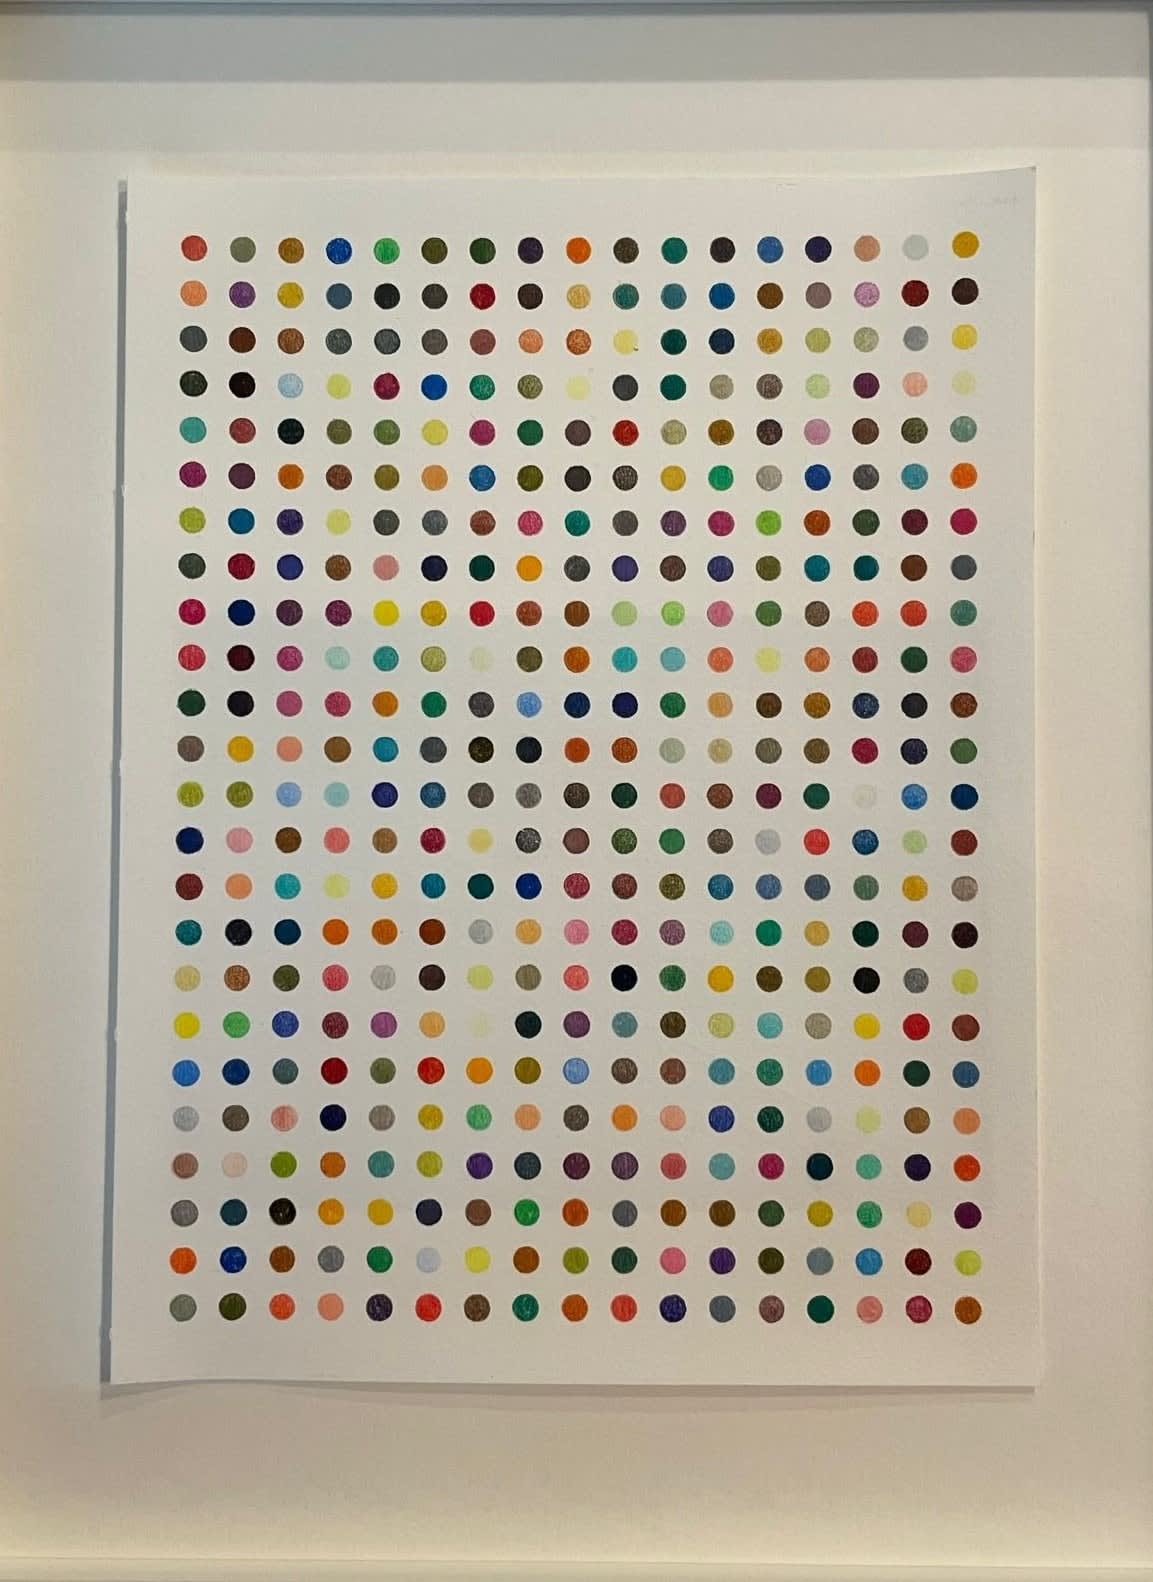 Signed Limited Edition Damien Hirst Print* - arts & crafts - by